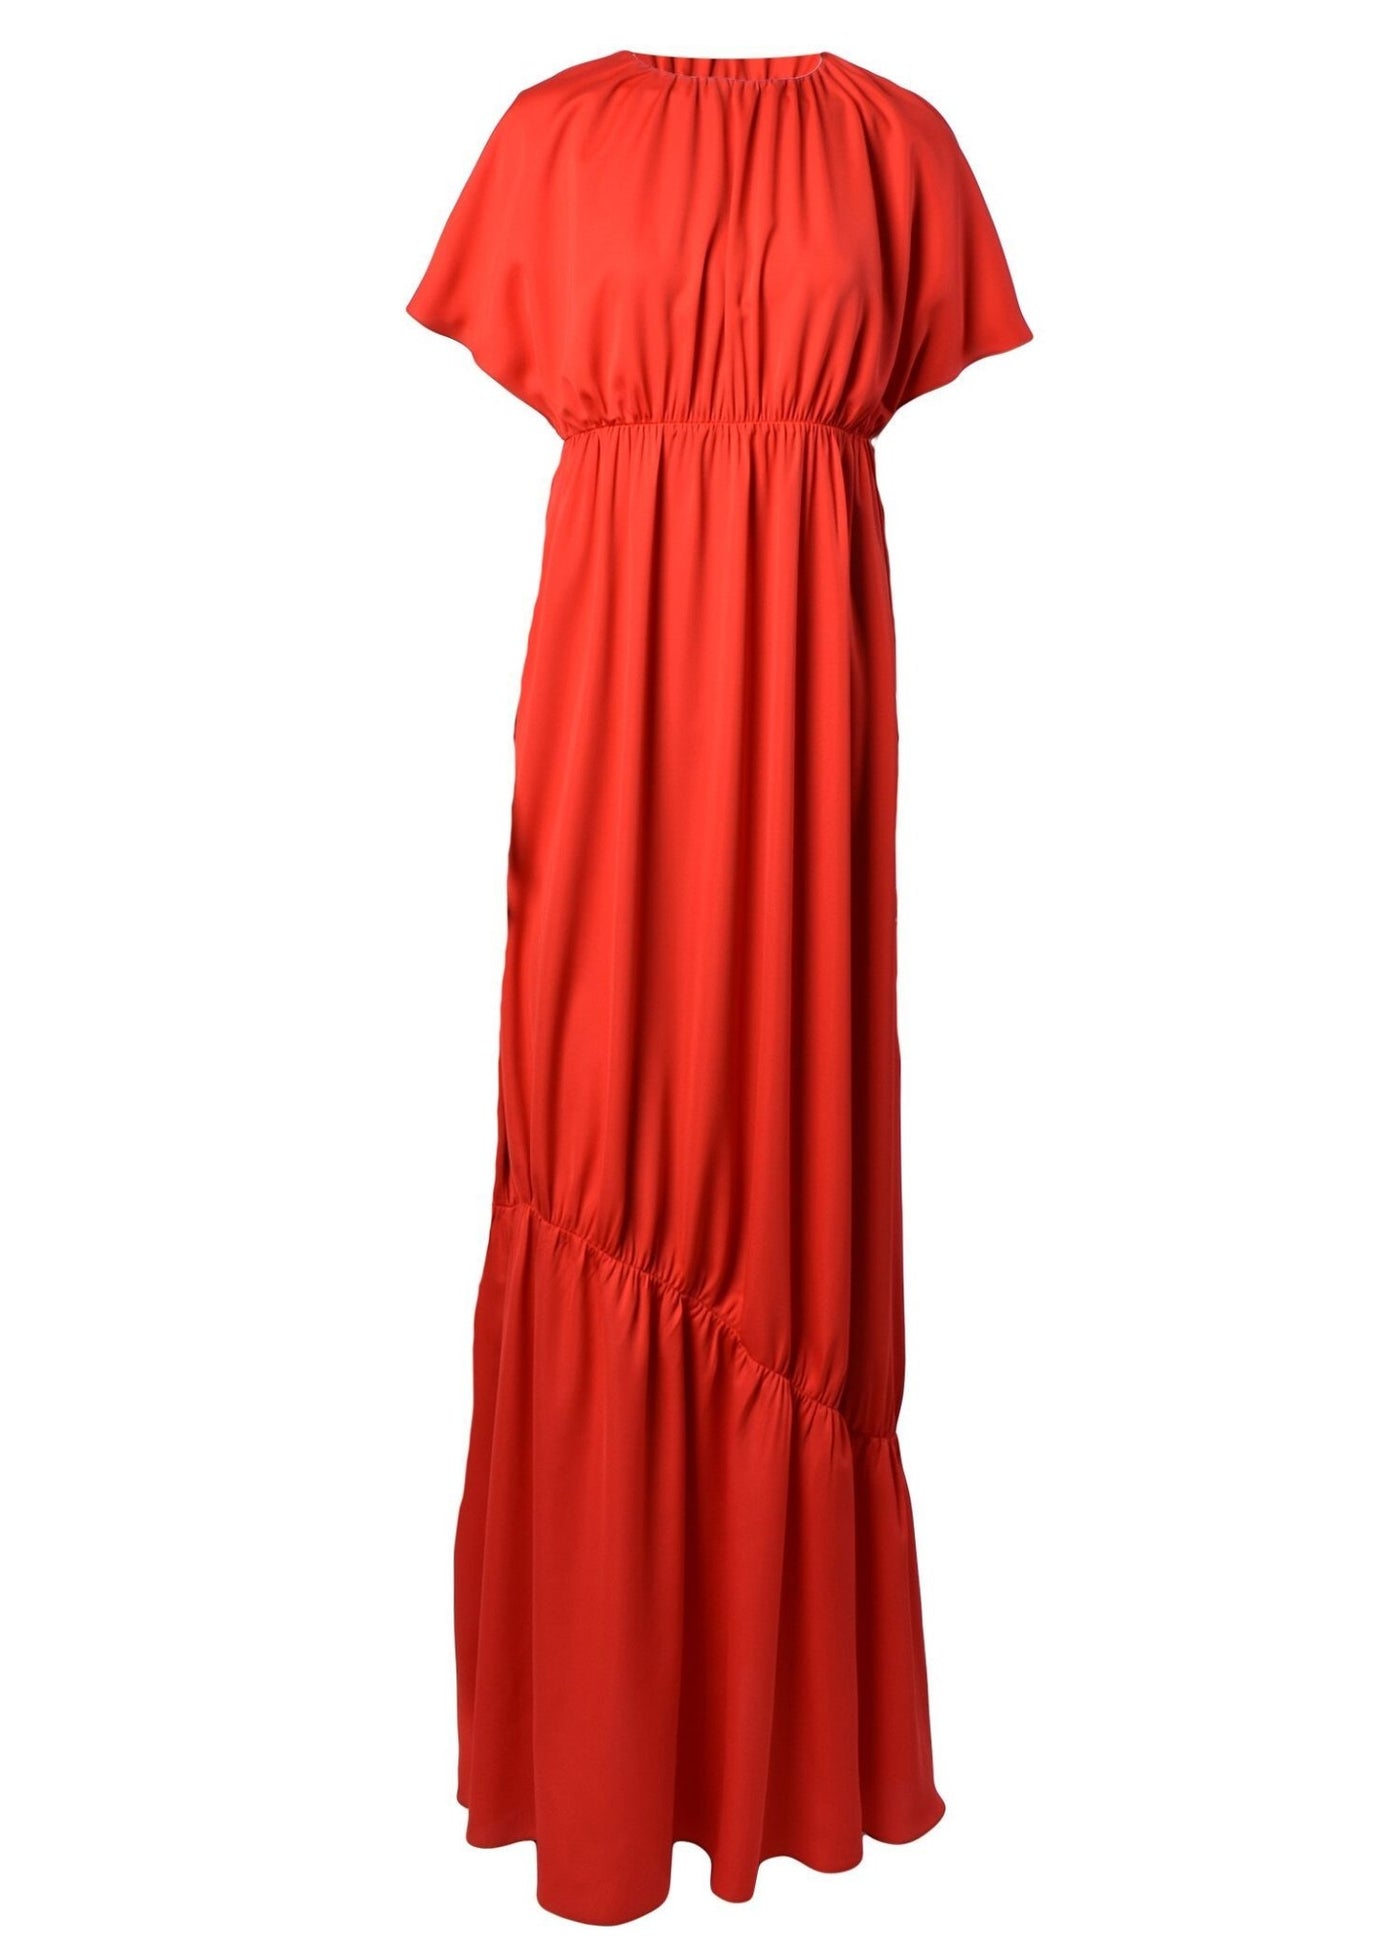 Frown Maxi Dress - The Clothing LoungeNOPIN